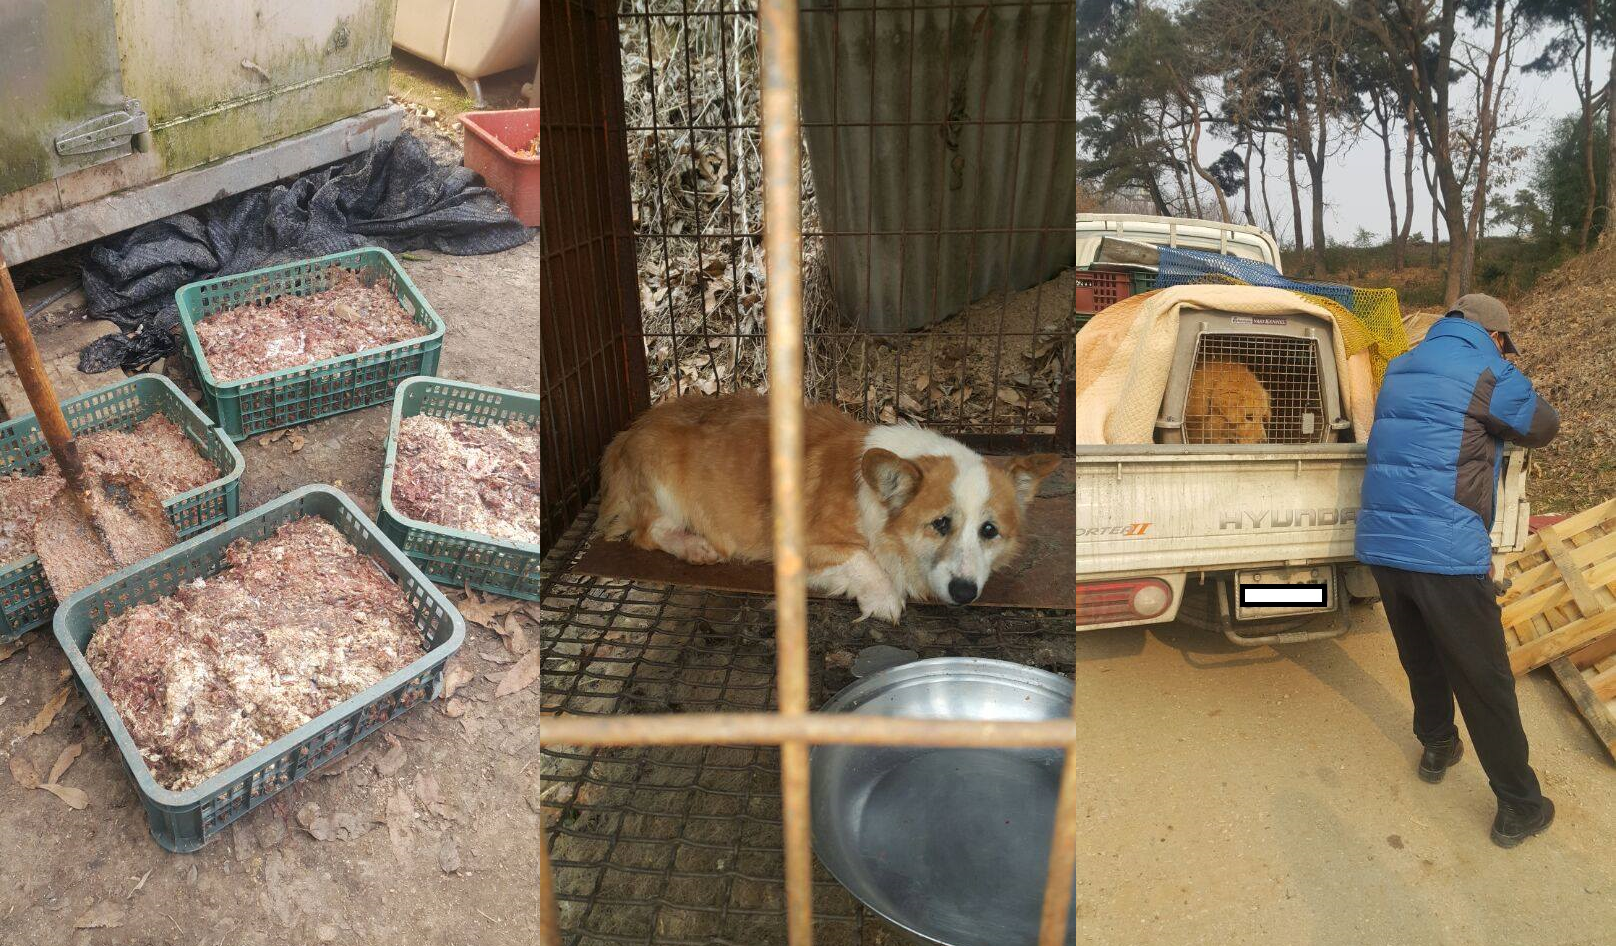 Call for Action: Illegal puppy mill/dog farm in Nonsan, Deokpyeong-ri.